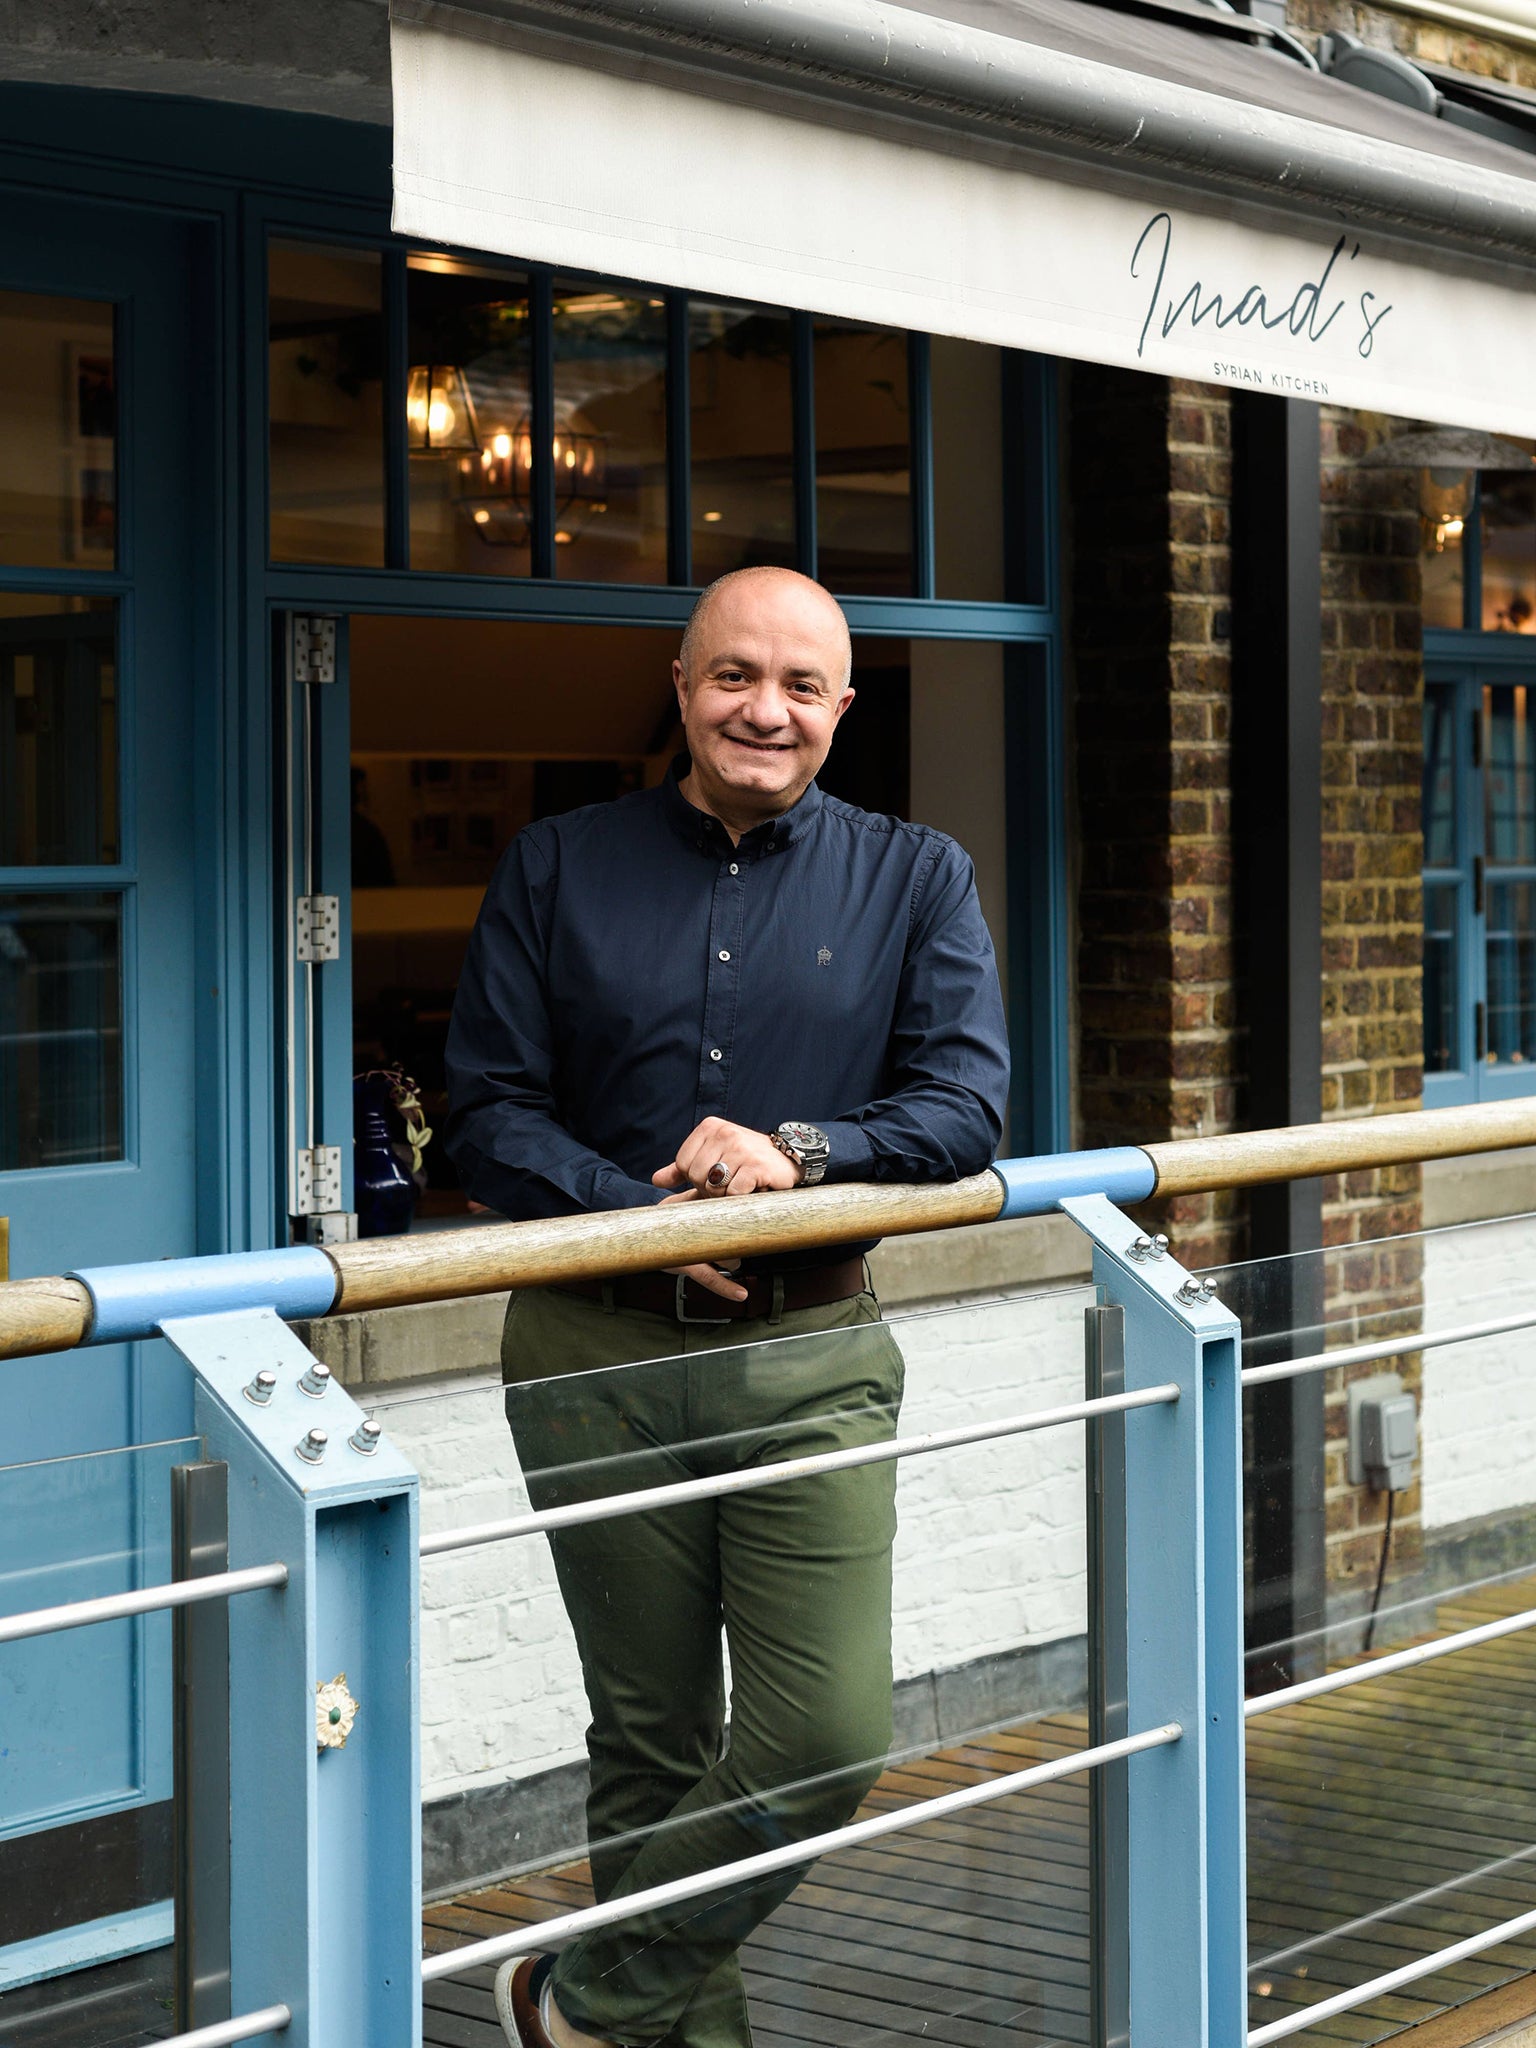 Alarnab opened Imad’s Syrian Kitchen in Covent Garden in May 2021